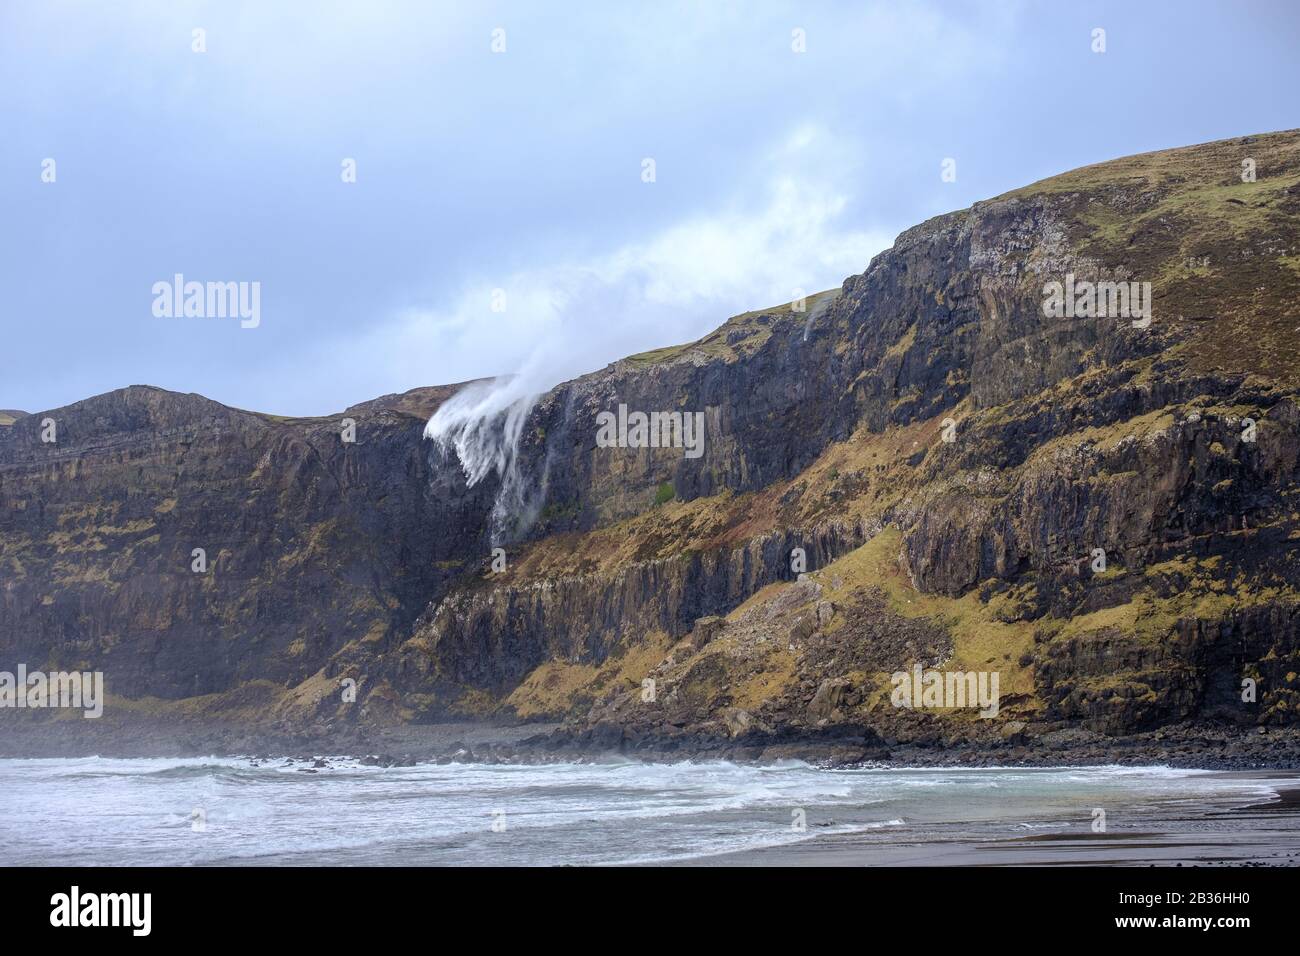 Waterfall at Talisker Bay, Skye, Inner Hebrides, appearing to flow upwards due to strong storm winds Stock Photo